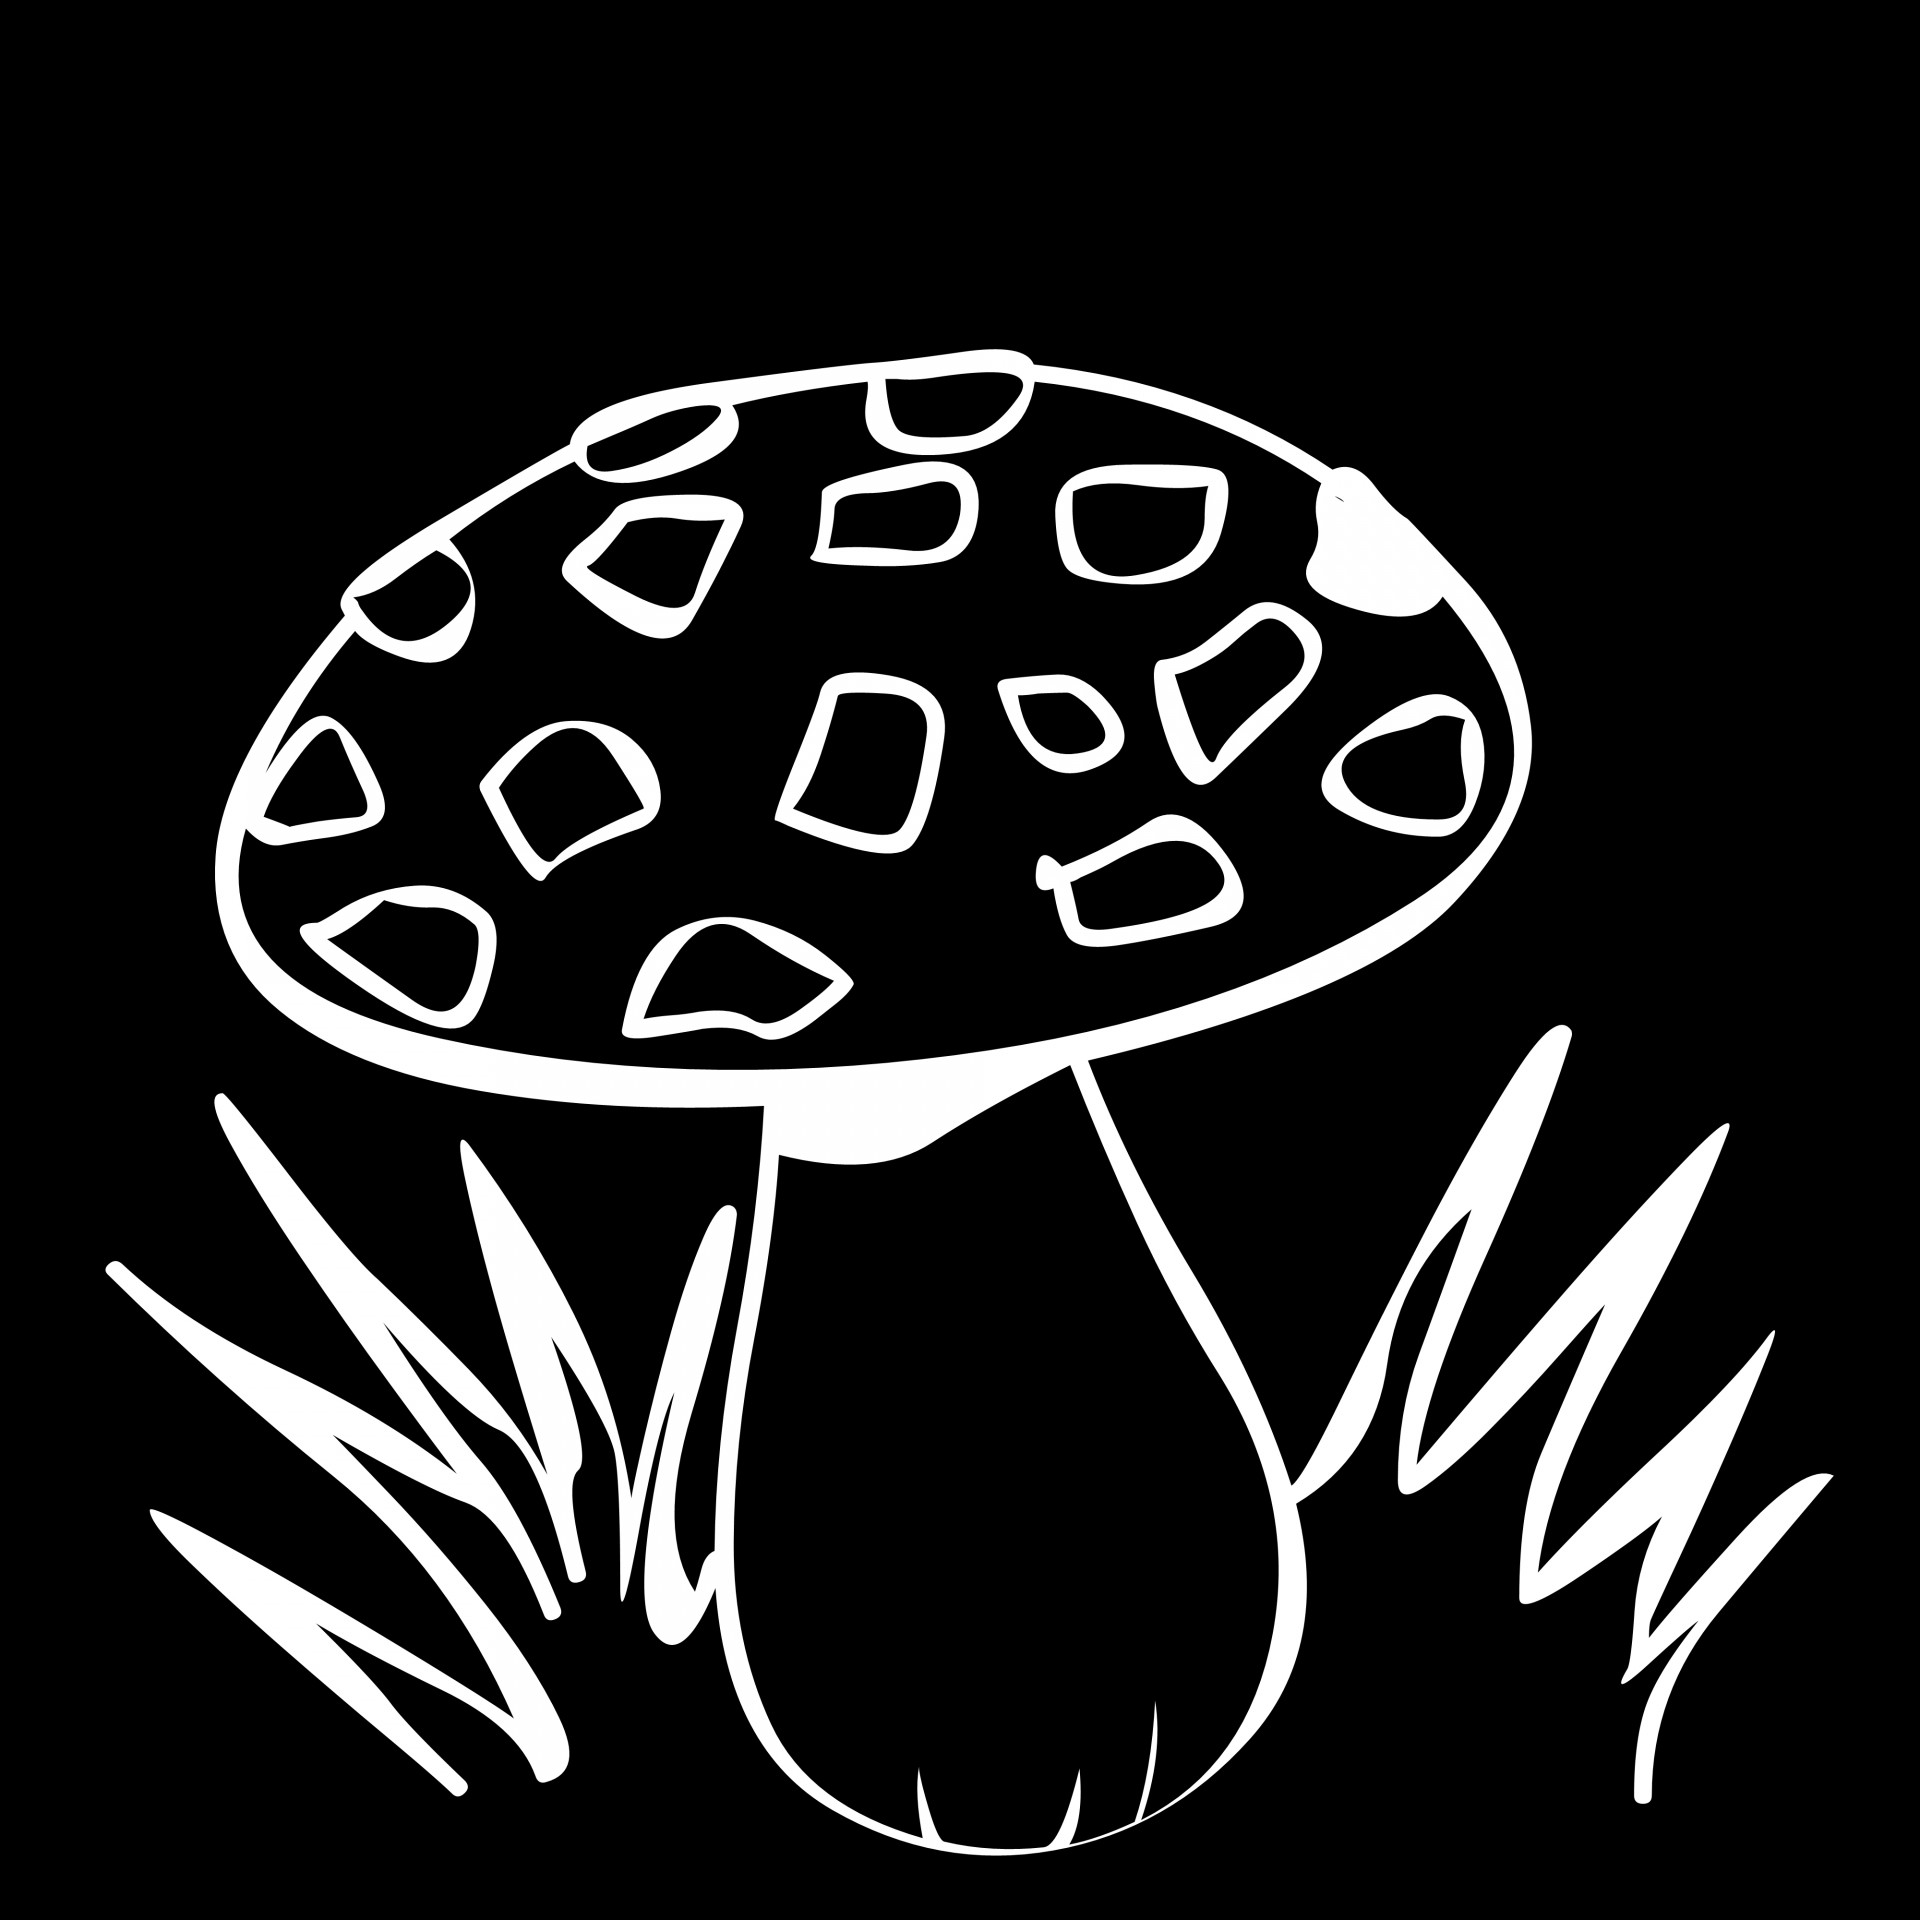 drawing of a white mushroom on black background